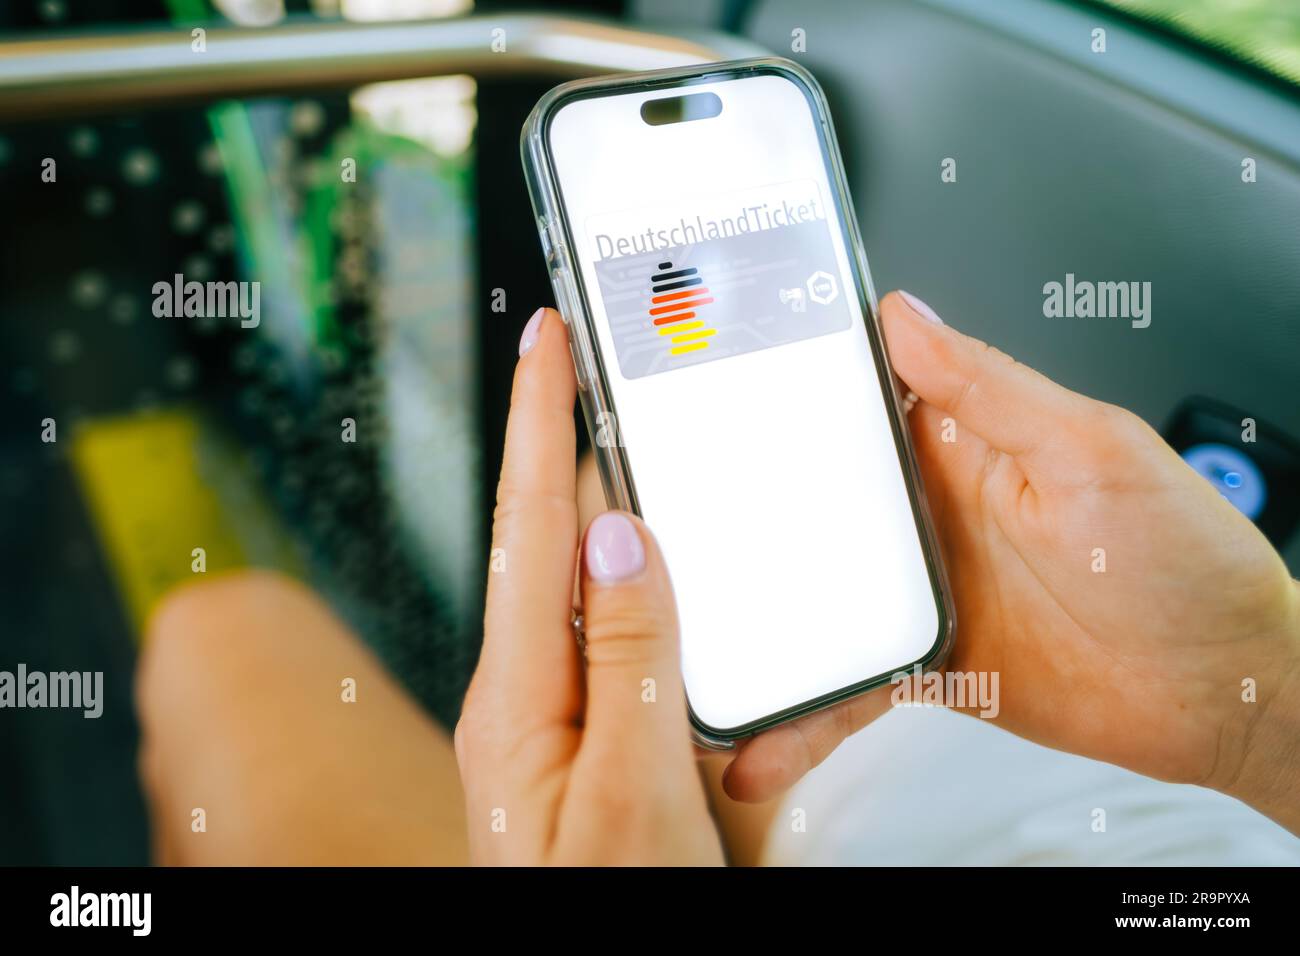 DeutchlandTicket on mobile phone screen, woman holding iPhone with new German subscription travel card. Stock Photo